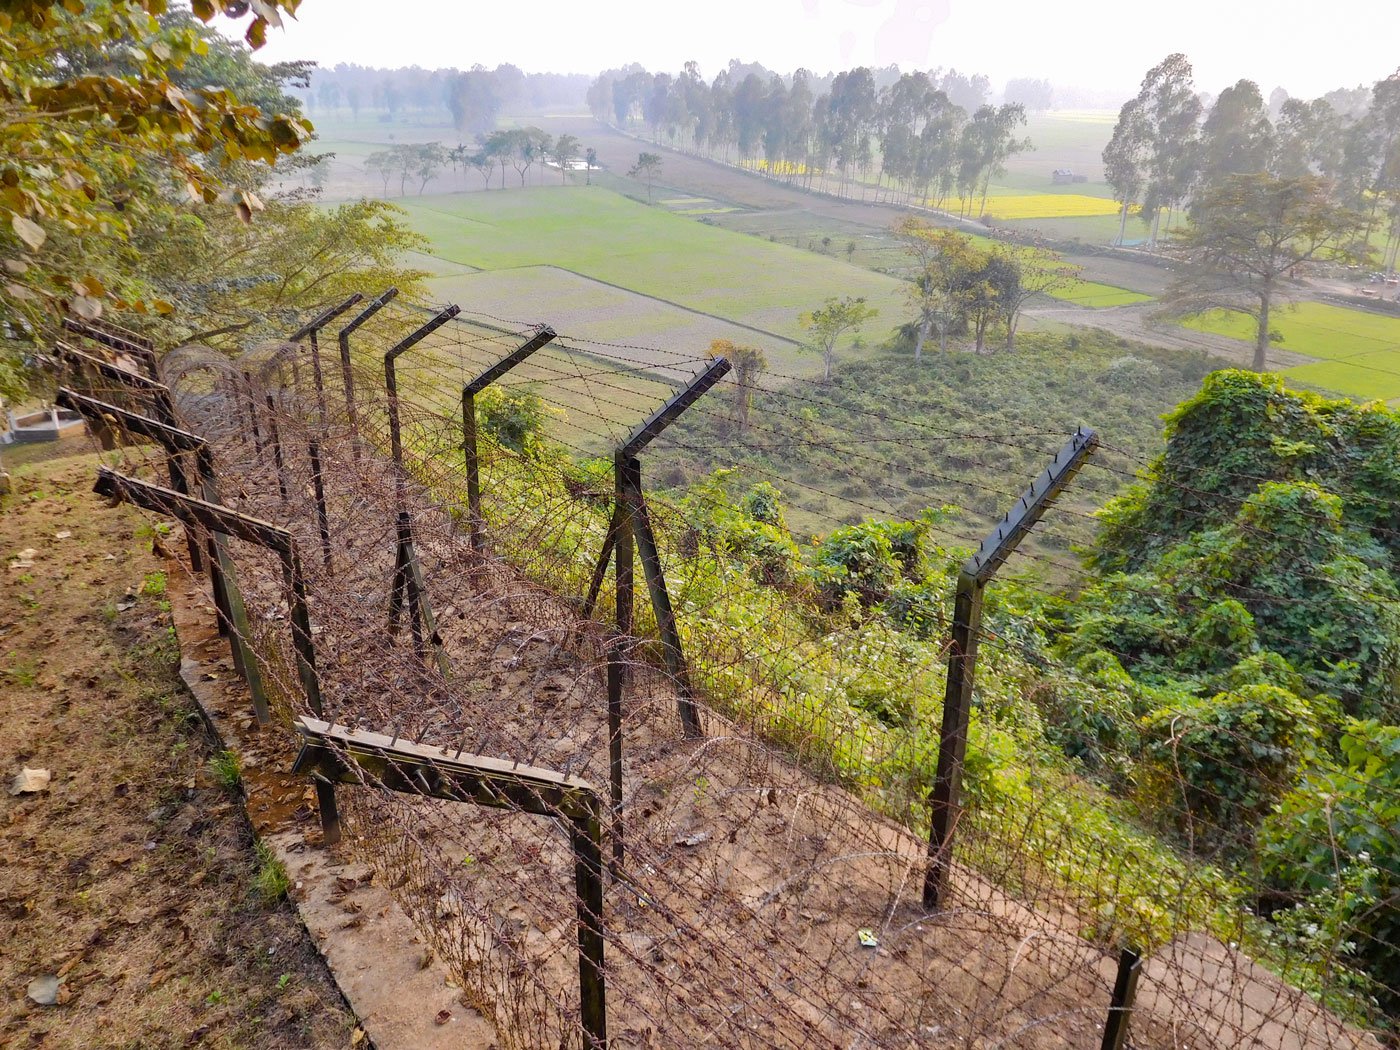 Anarul has to cross this border to reach his land in a 'buffer zone' maintained as part of an India-Bangladesh agreement